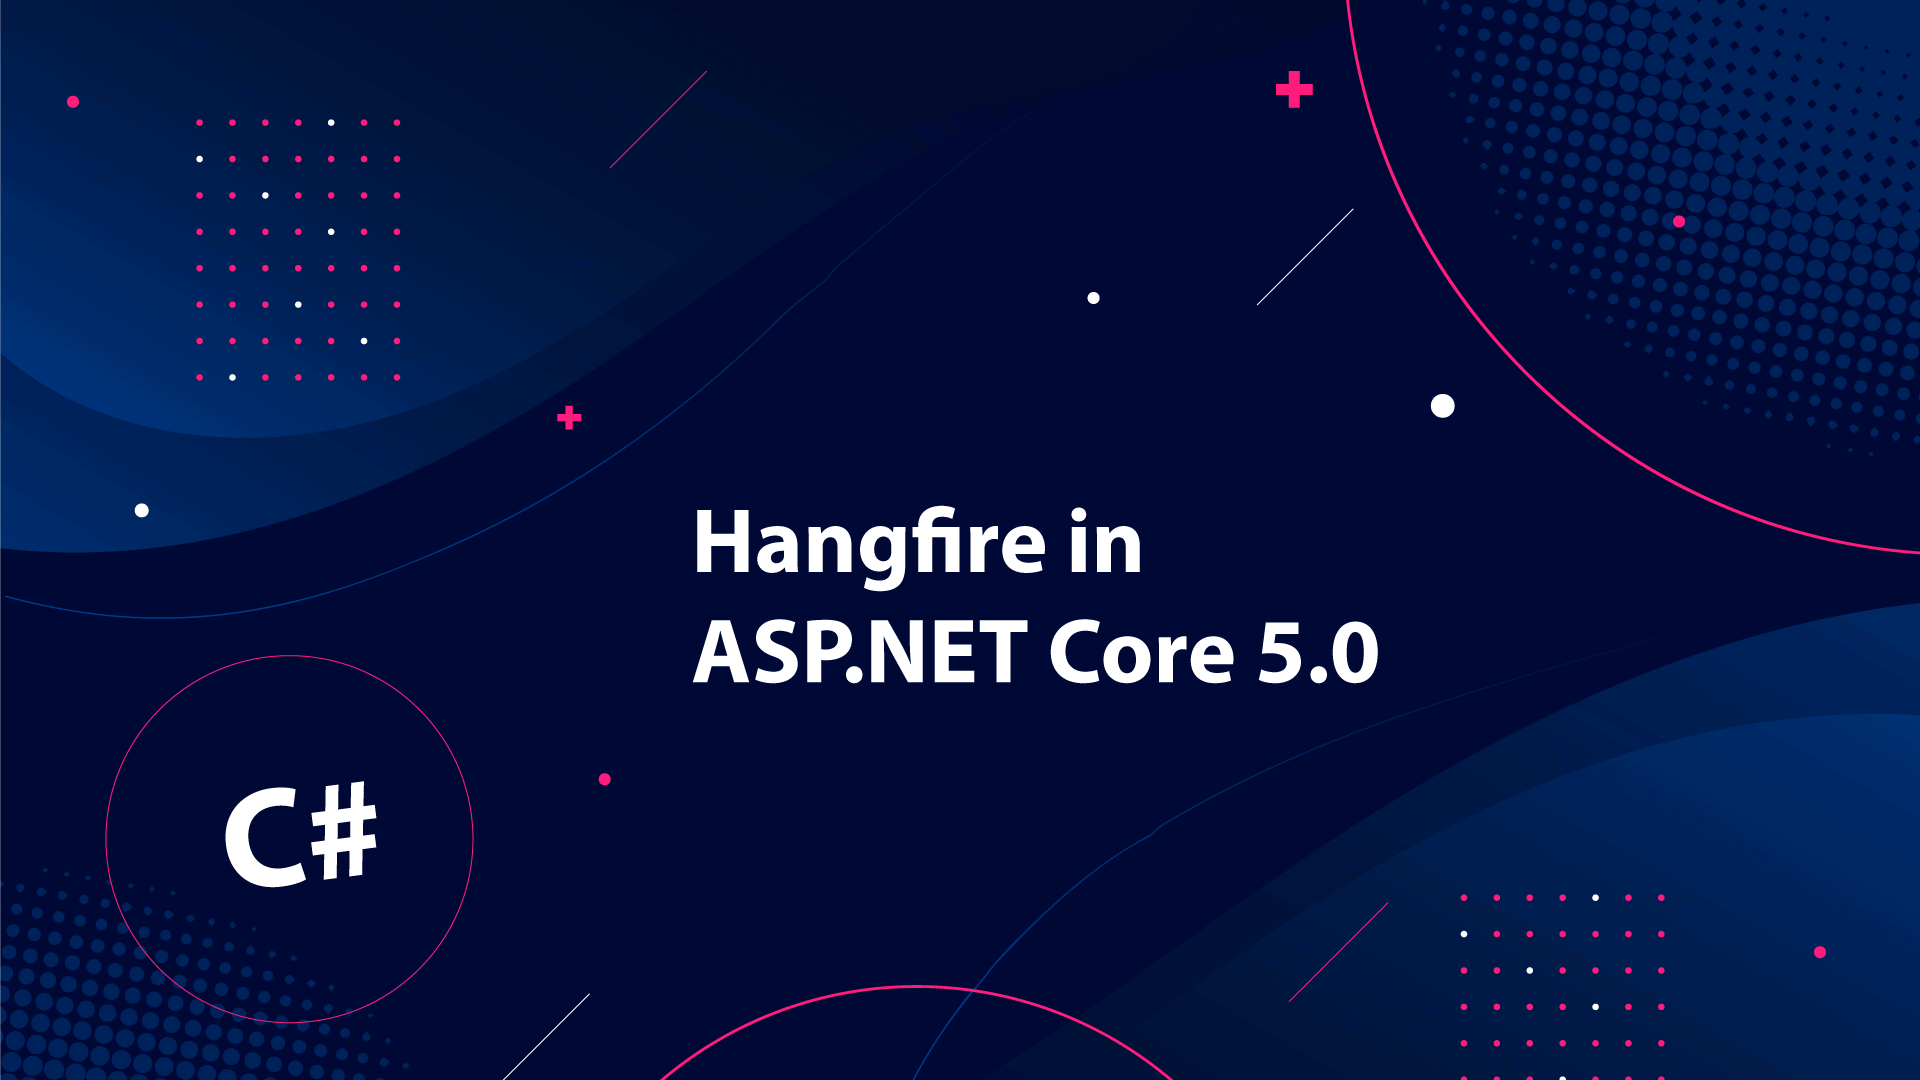 How to use Hangfire with ASP.NET Core 5.0 - Making Background Jobs Easy